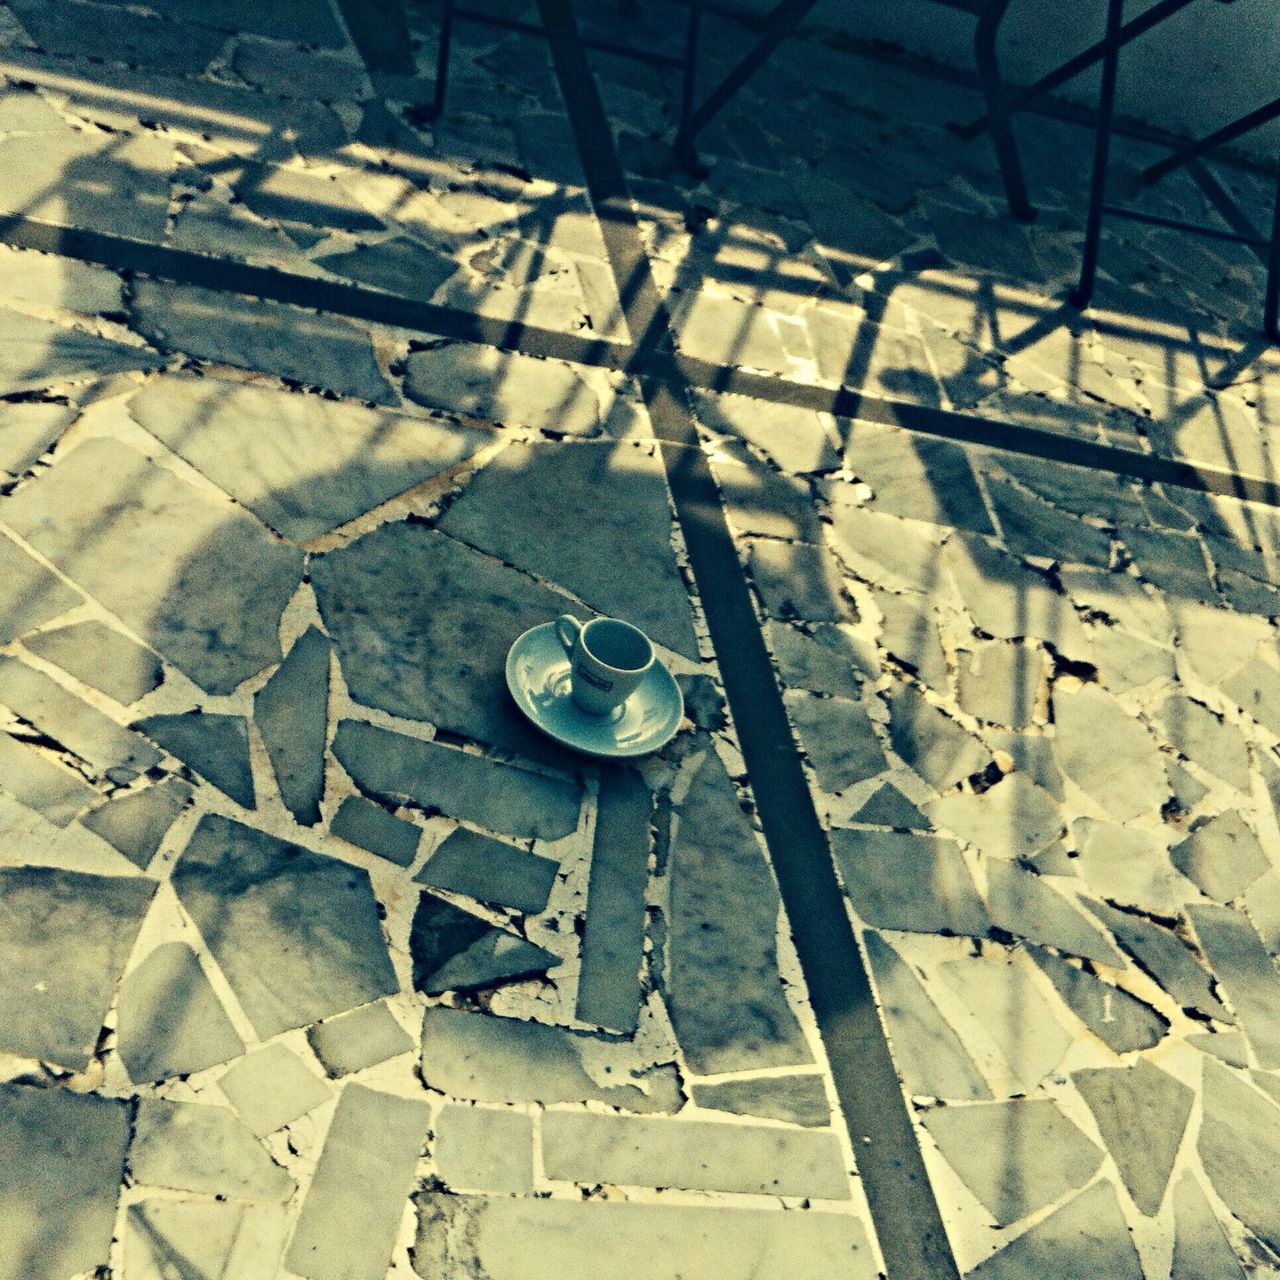 high angle view, pattern, metal, full frame, old, built structure, no people, abandoned, backgrounds, day, damaged, outdoors, sunlight, close-up, geometric shape, obsolete, cobblestone, metallic, deterioration, weathered